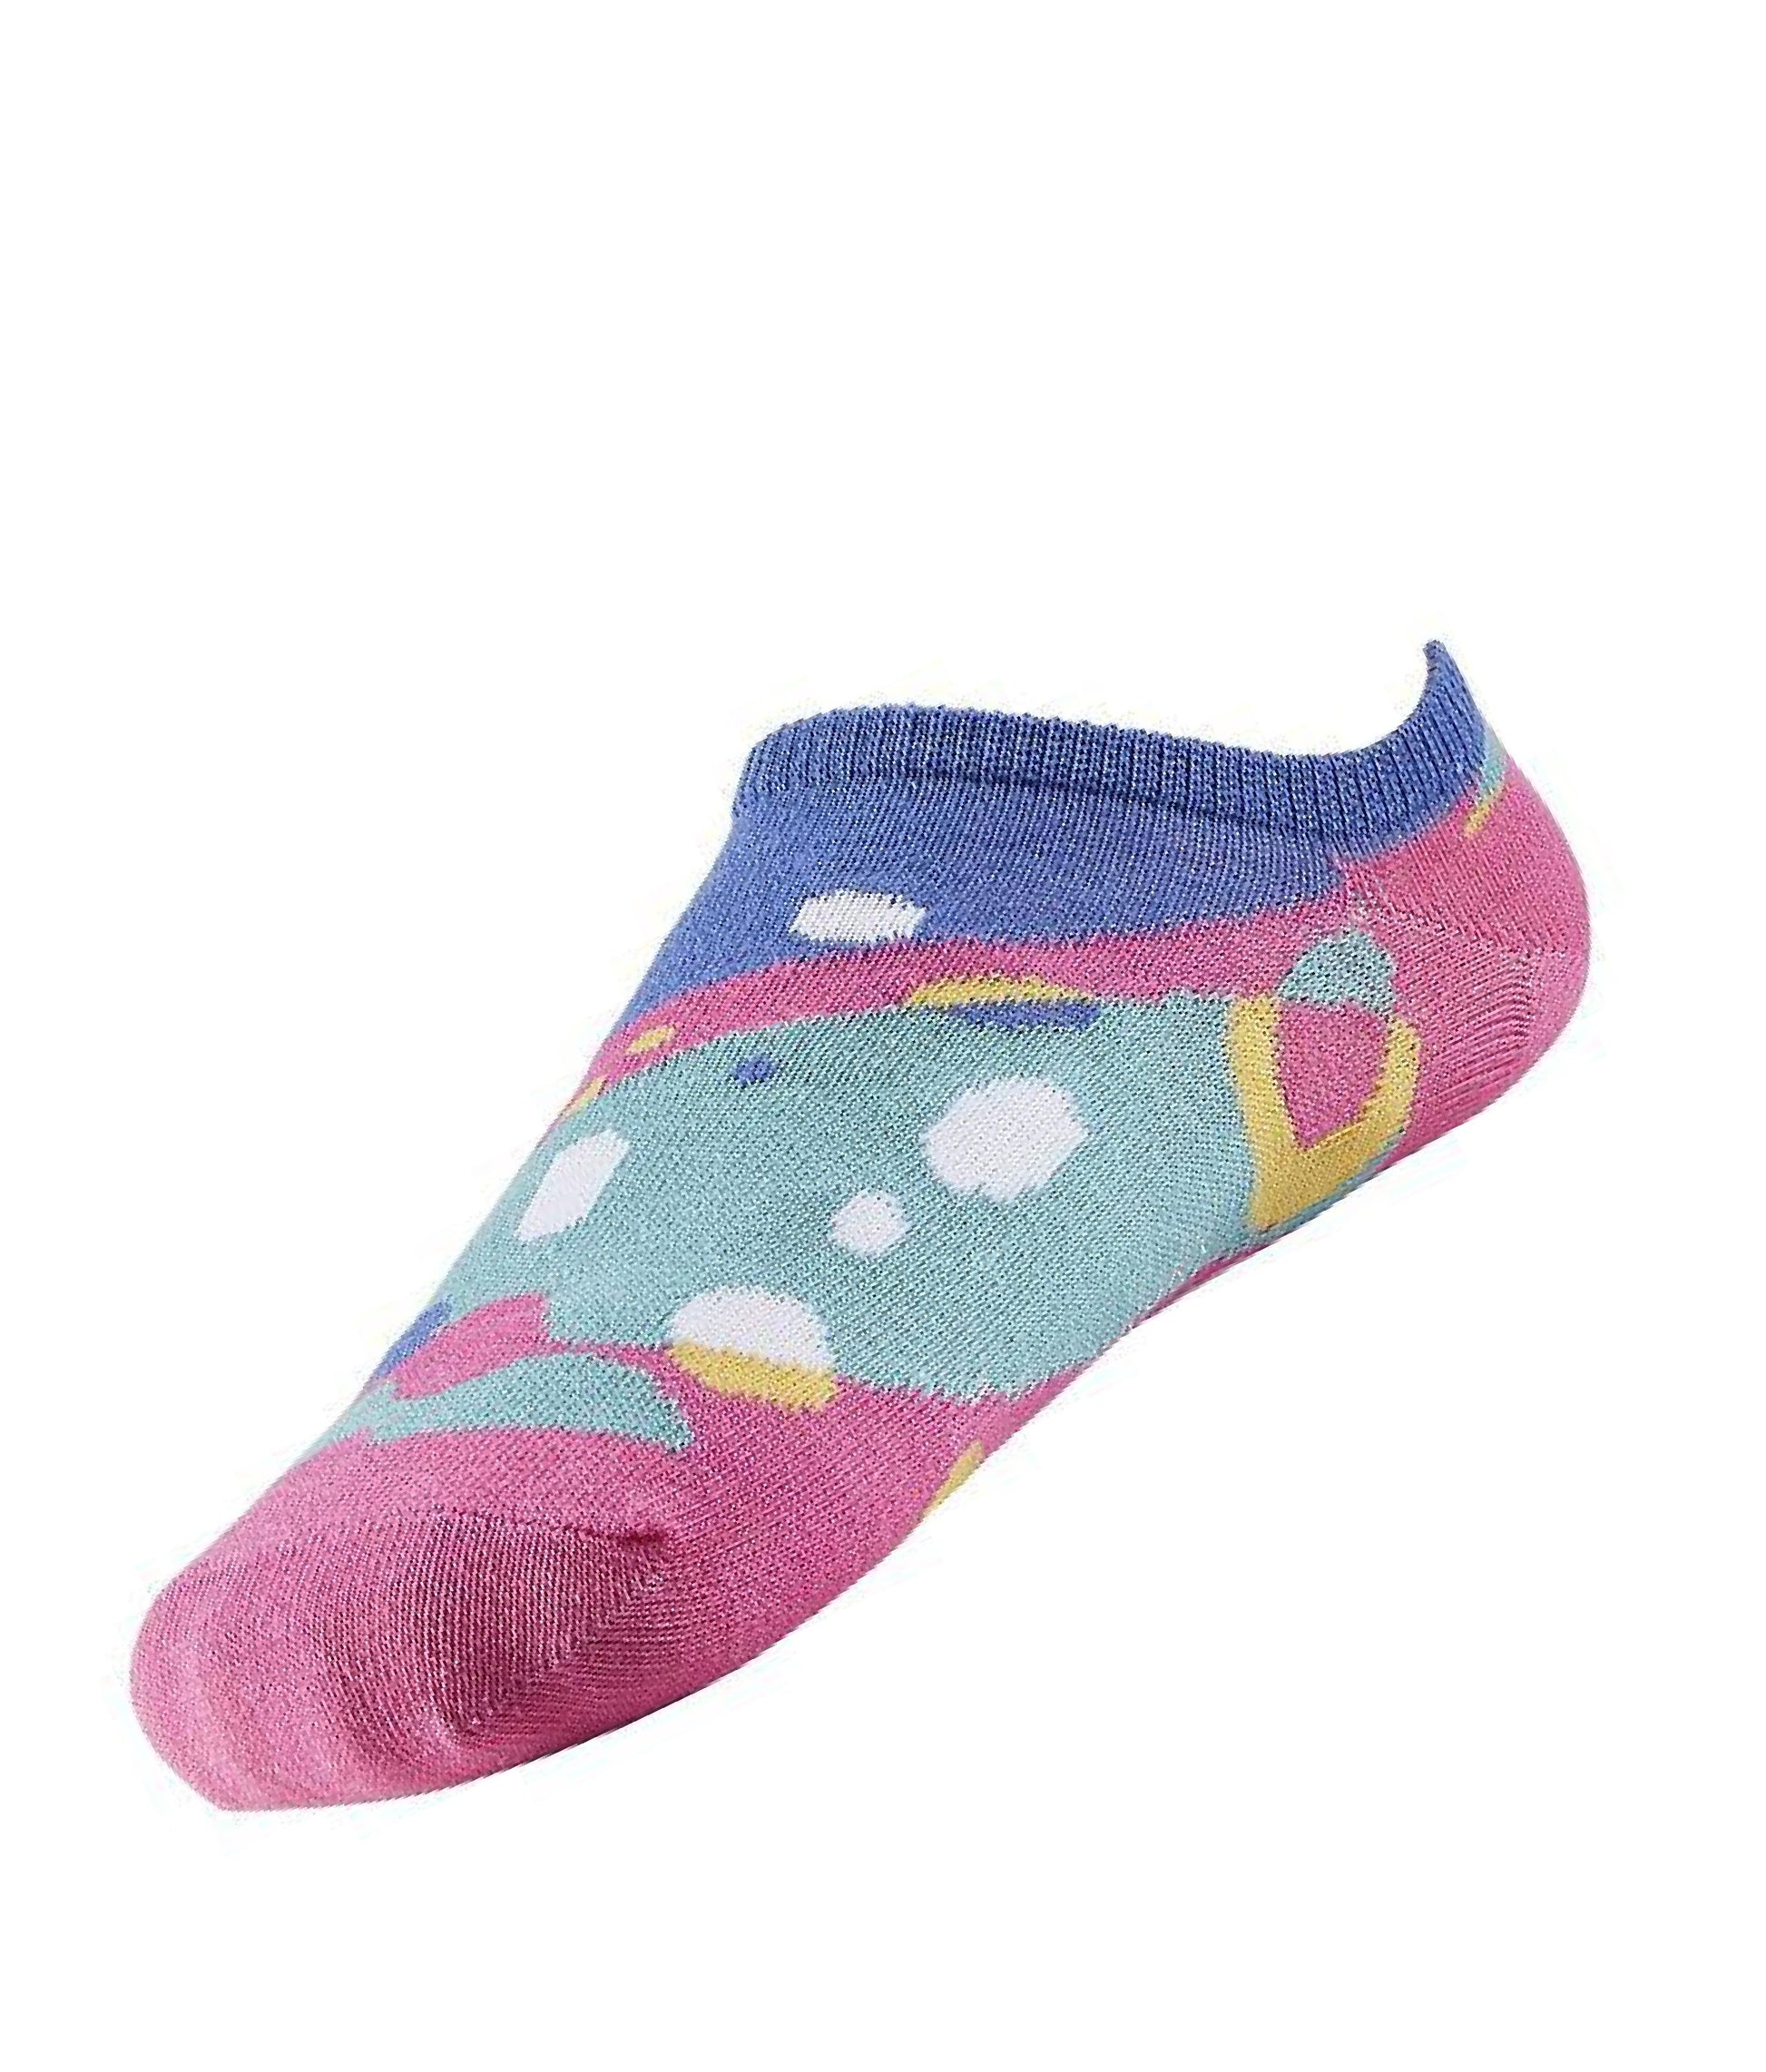 Ysabel Mora Marbled Low Sock - Multicoloured low ankle cotton sneaker no show socks with a marbled lava lamp bubble style pattern in purple, pink, mint green, yellow and white.